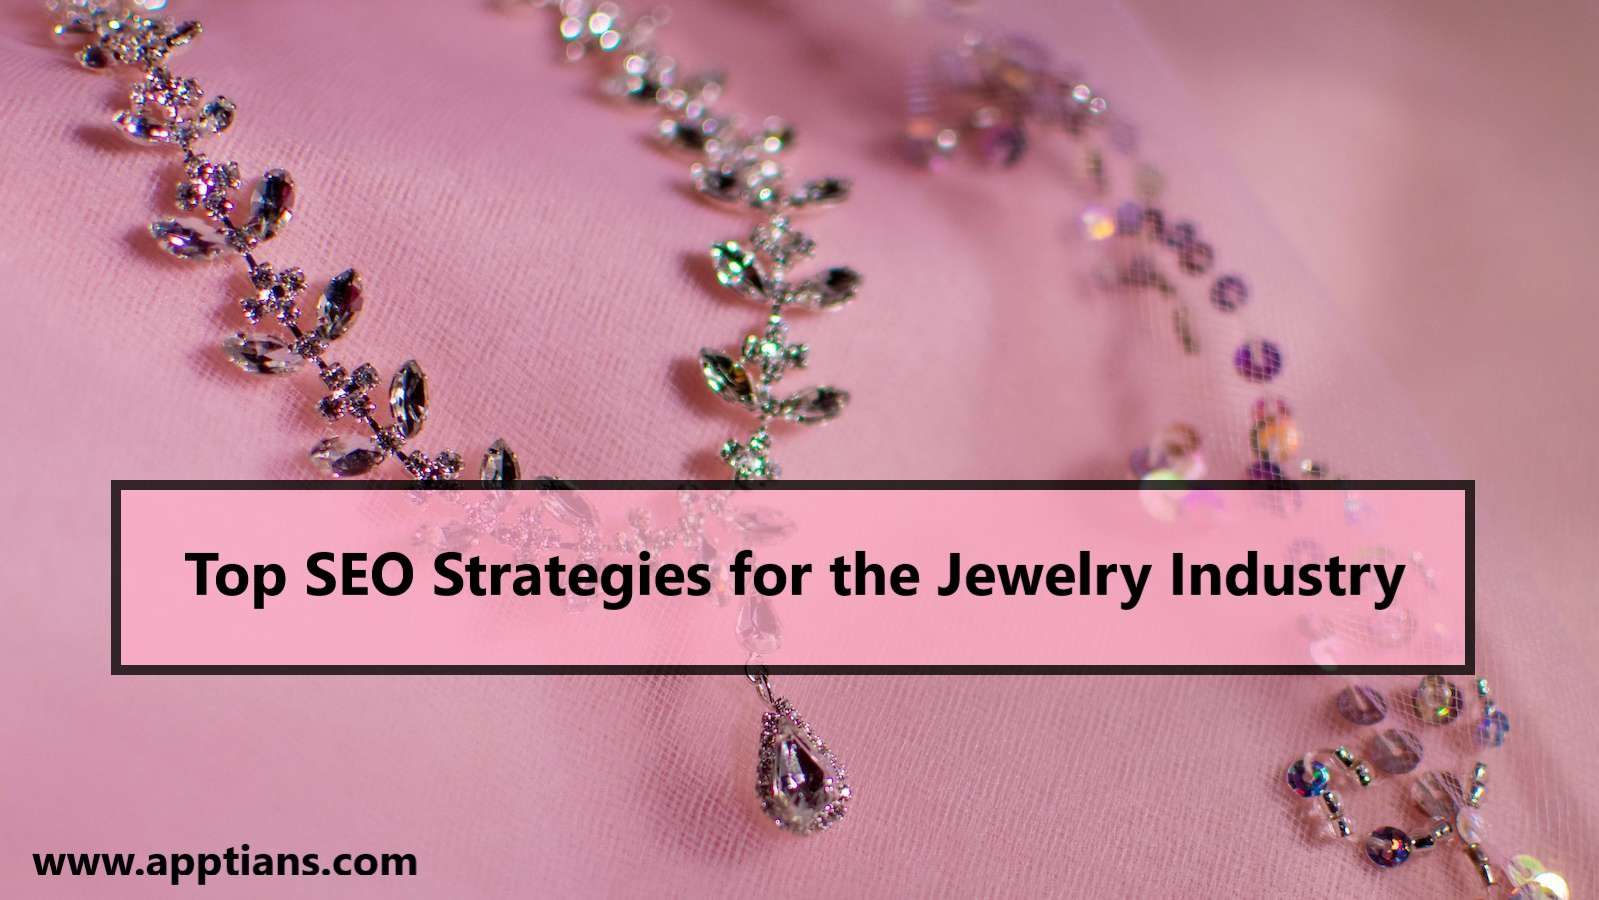 Top SEO Strategies for the Jewelry Industry